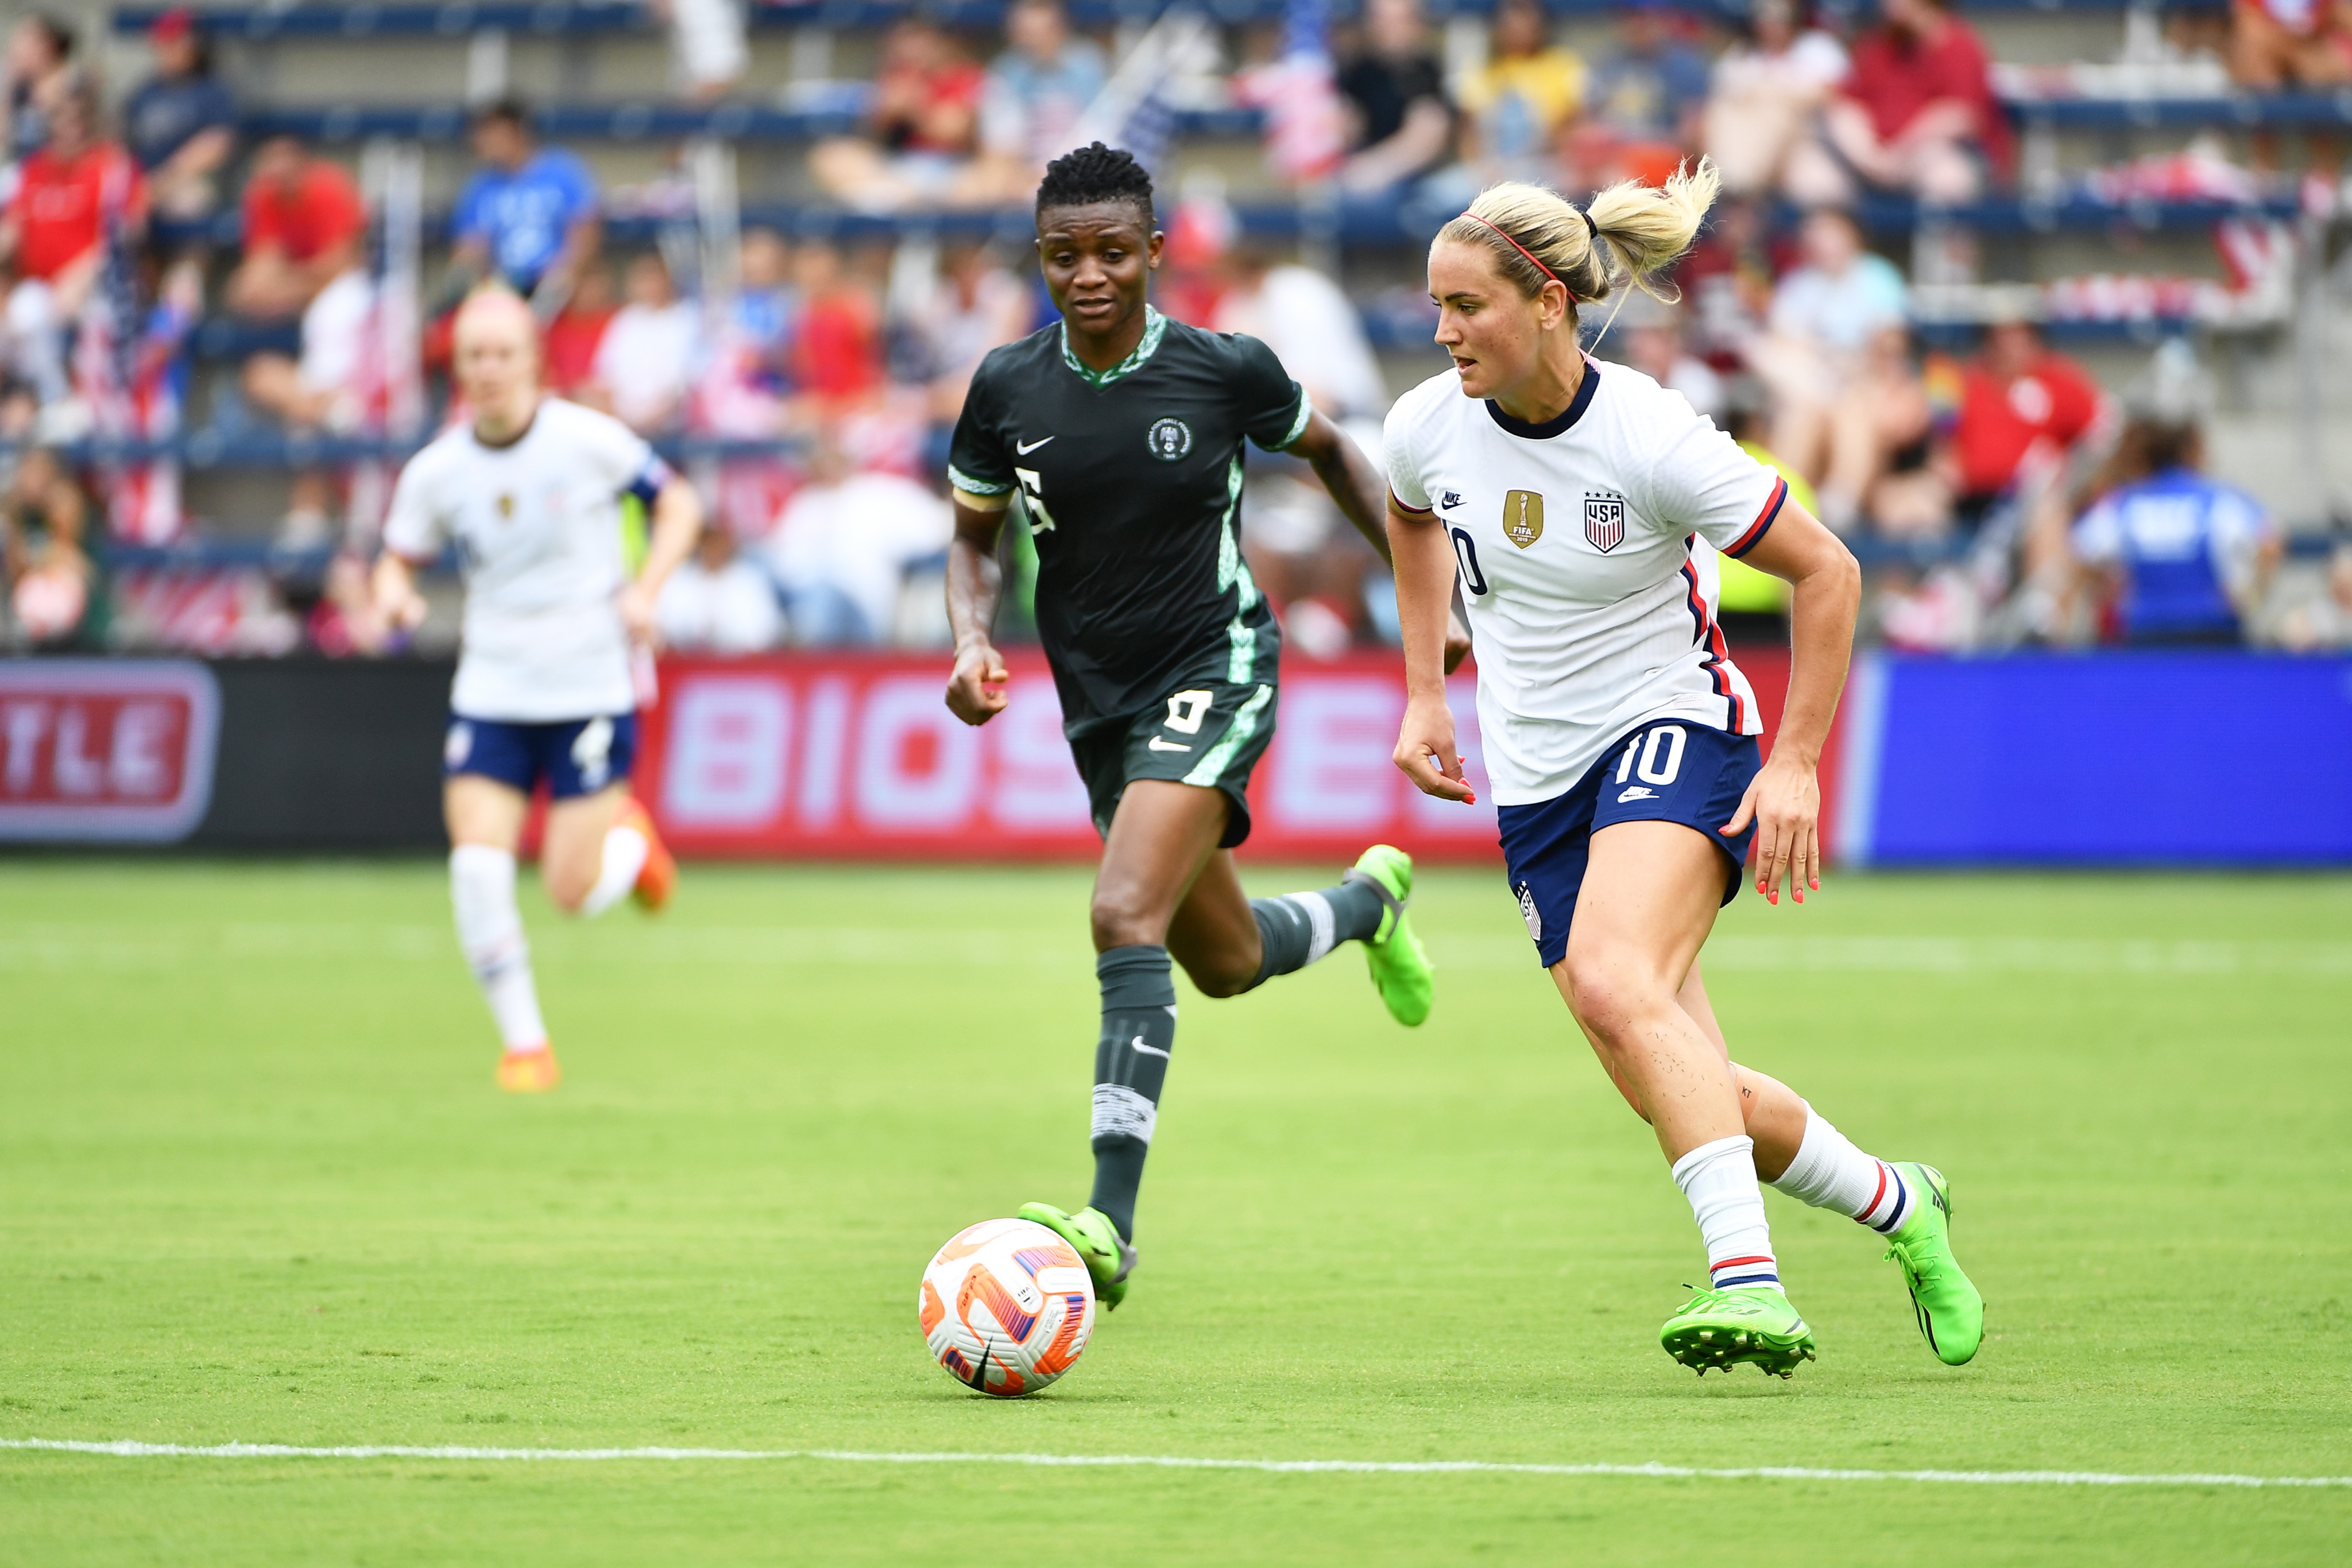 Uswnt Mexico In Action This Week In Women S Football